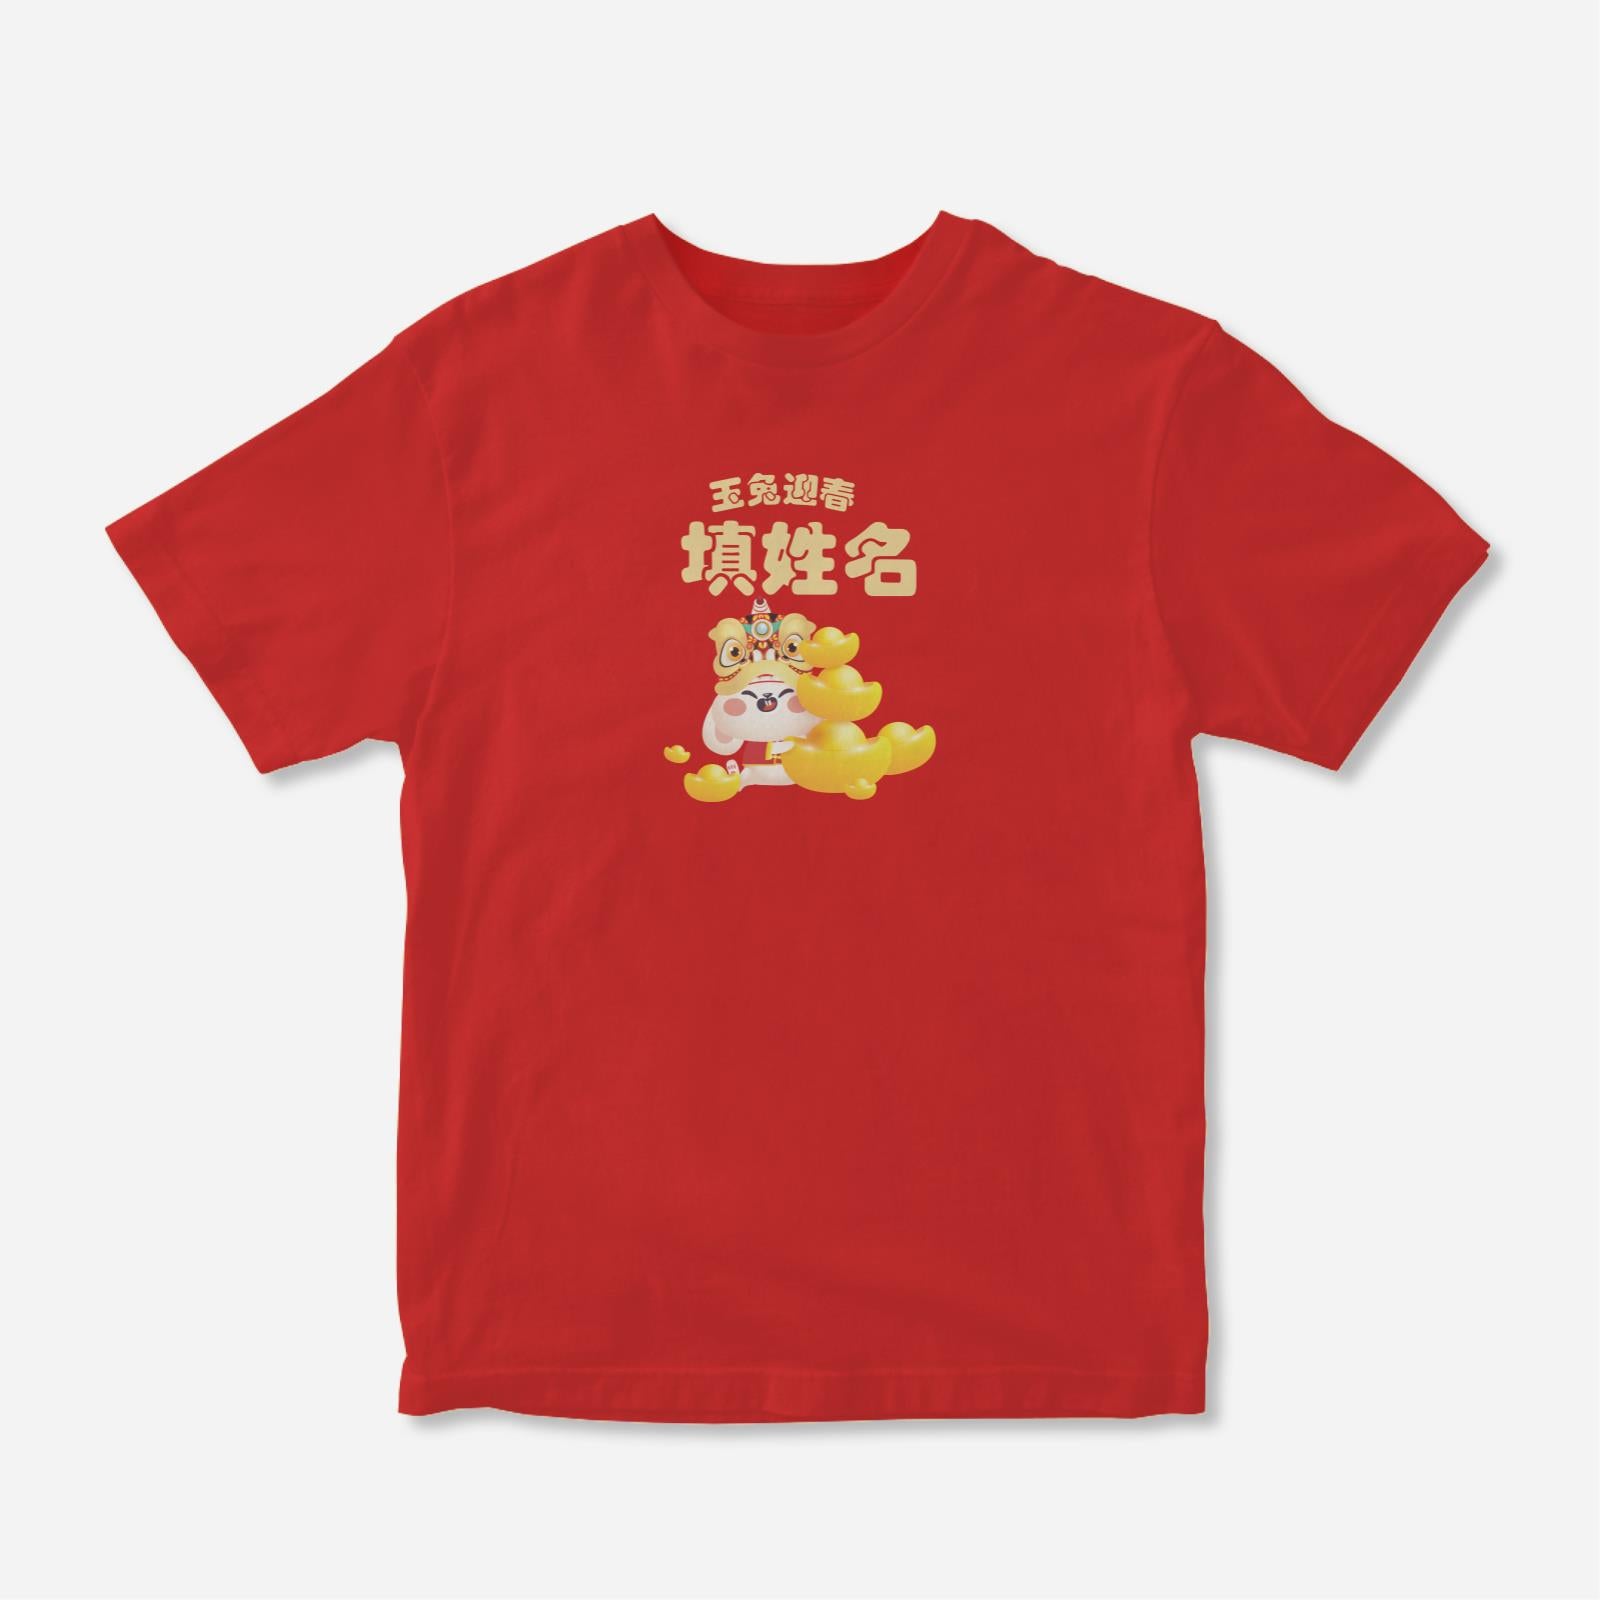 Cny Rabbit Family - Baby Rabbit Kids Tee Shirt with Chinese Personalization